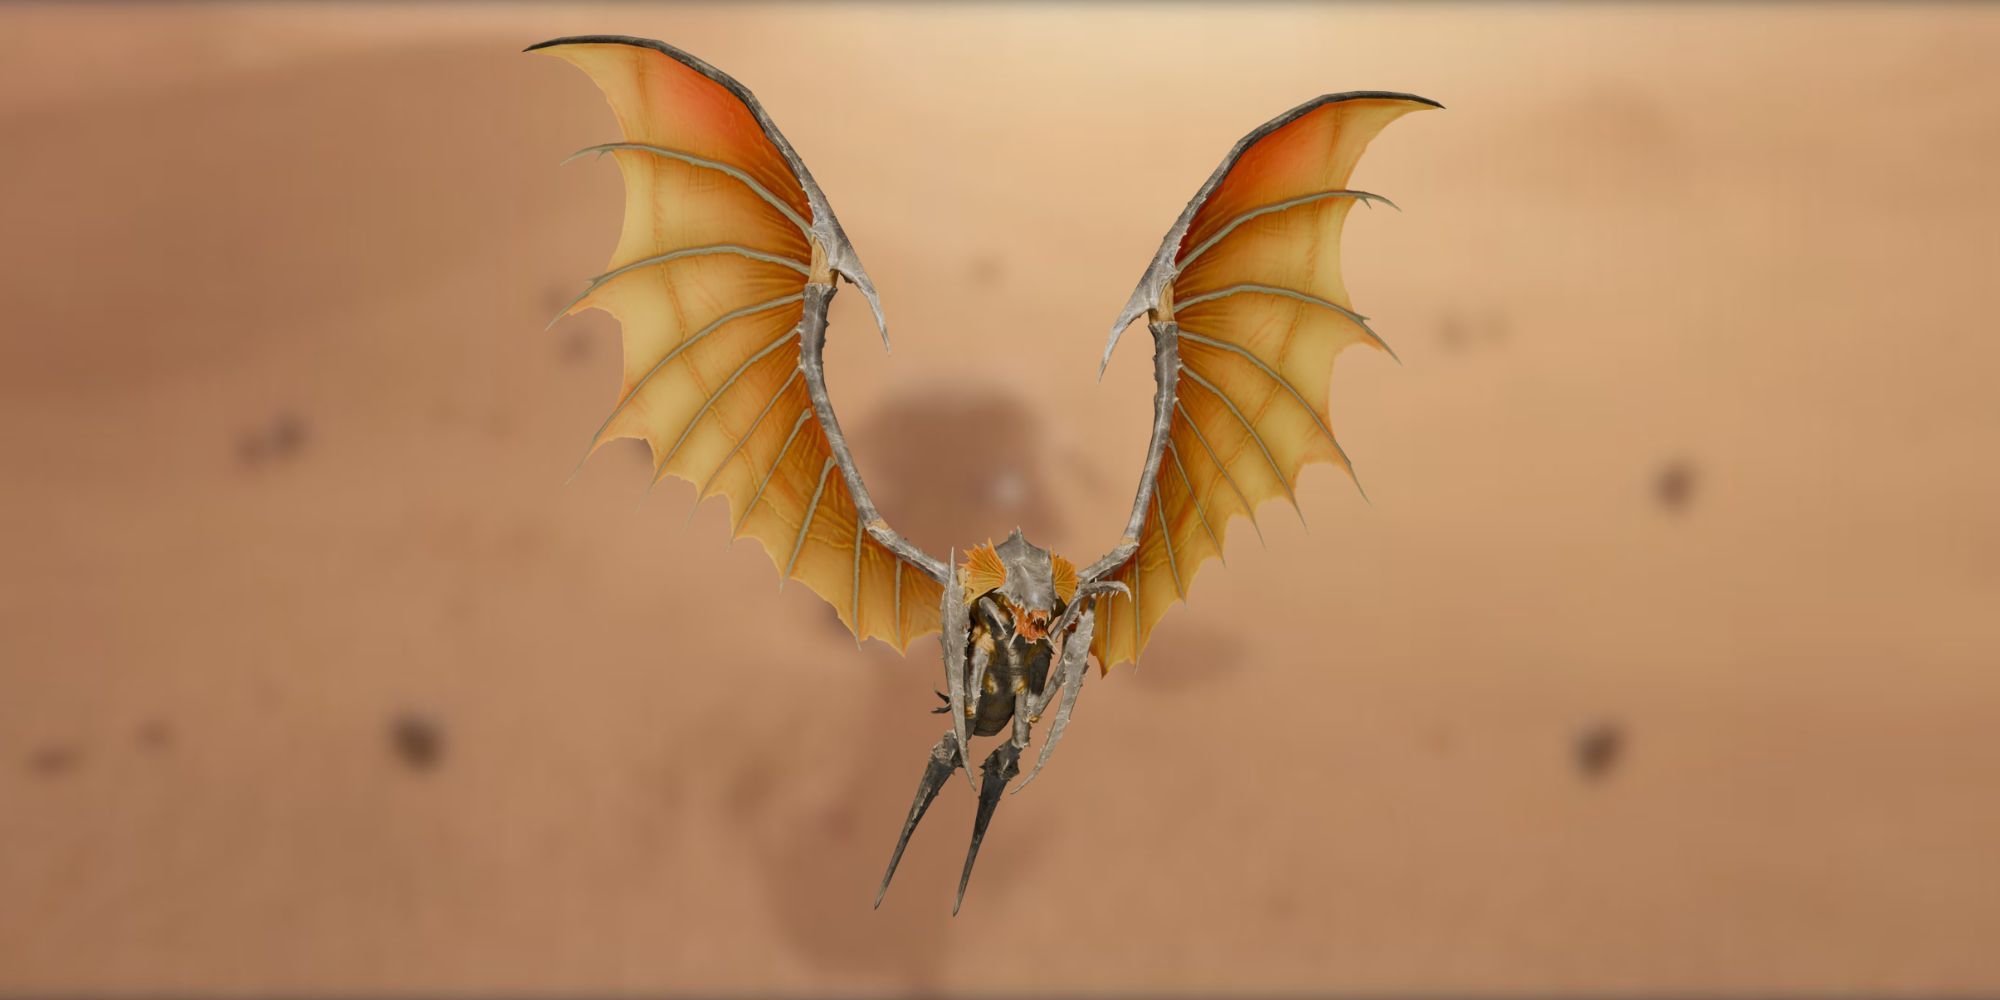 An image of a shrieker from Helldivers on an orange background